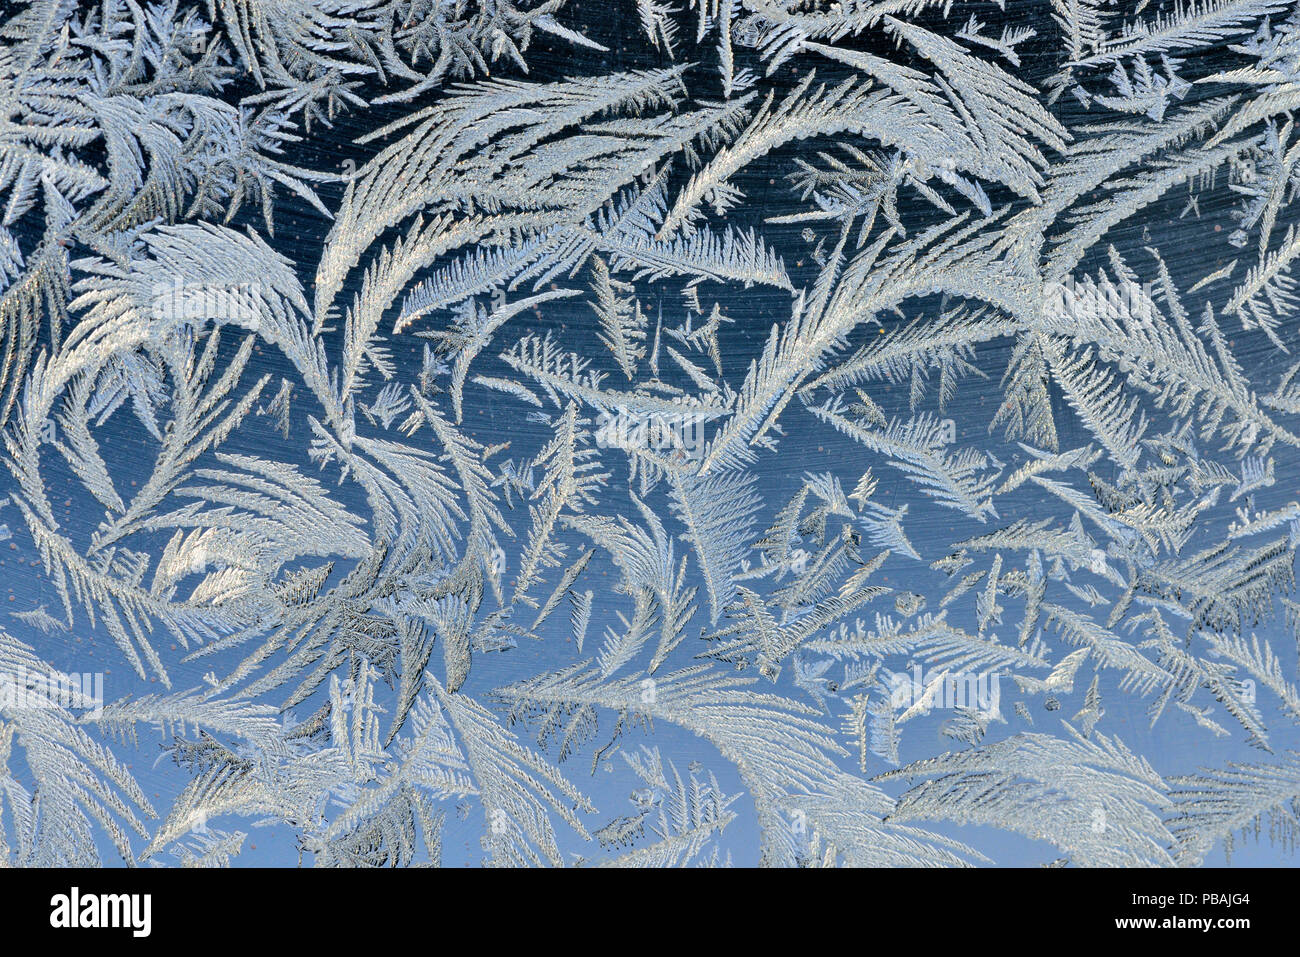 Frost patterns on a window, Greater Sudbury, Ontario, Canada Stock Photo